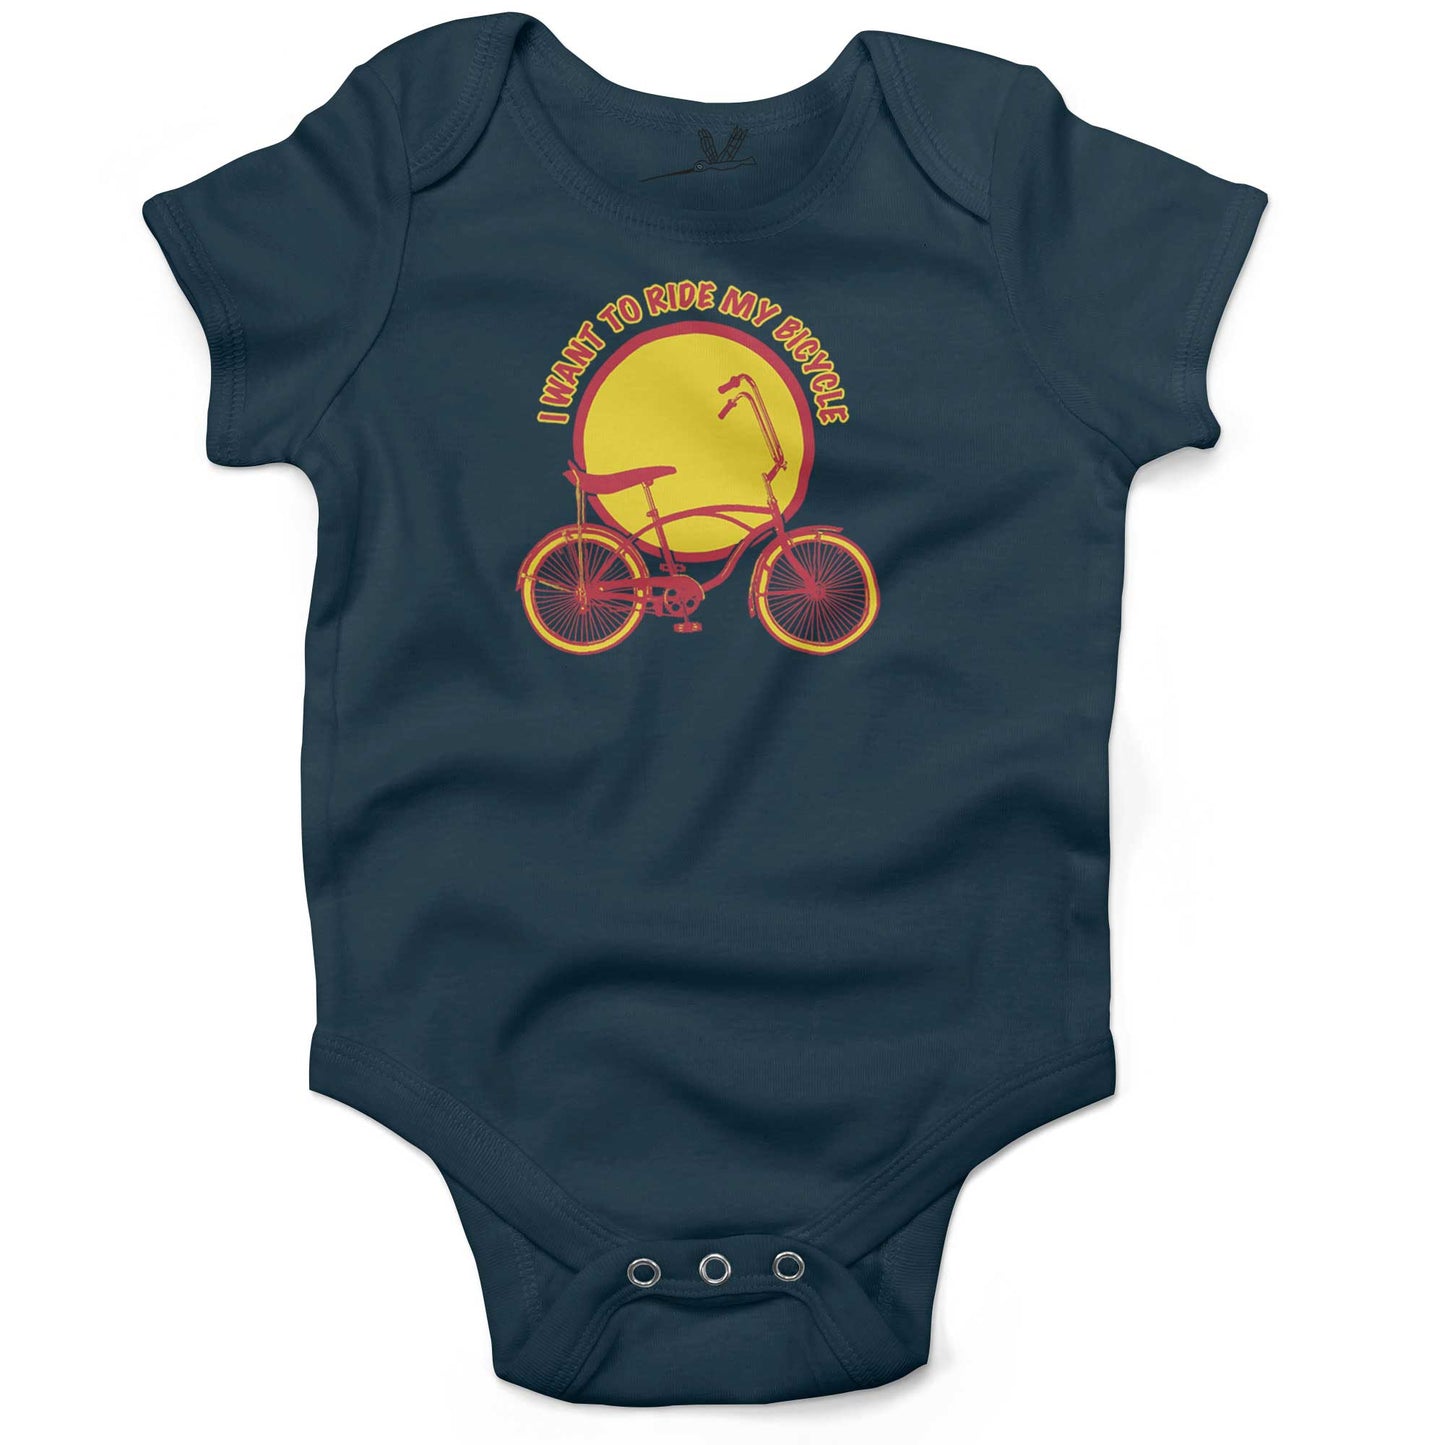 I Want To Ride My Bicycle Infant Bodysuit or Raglan Baby Tee-Organic Pacific Blue-3-6 months